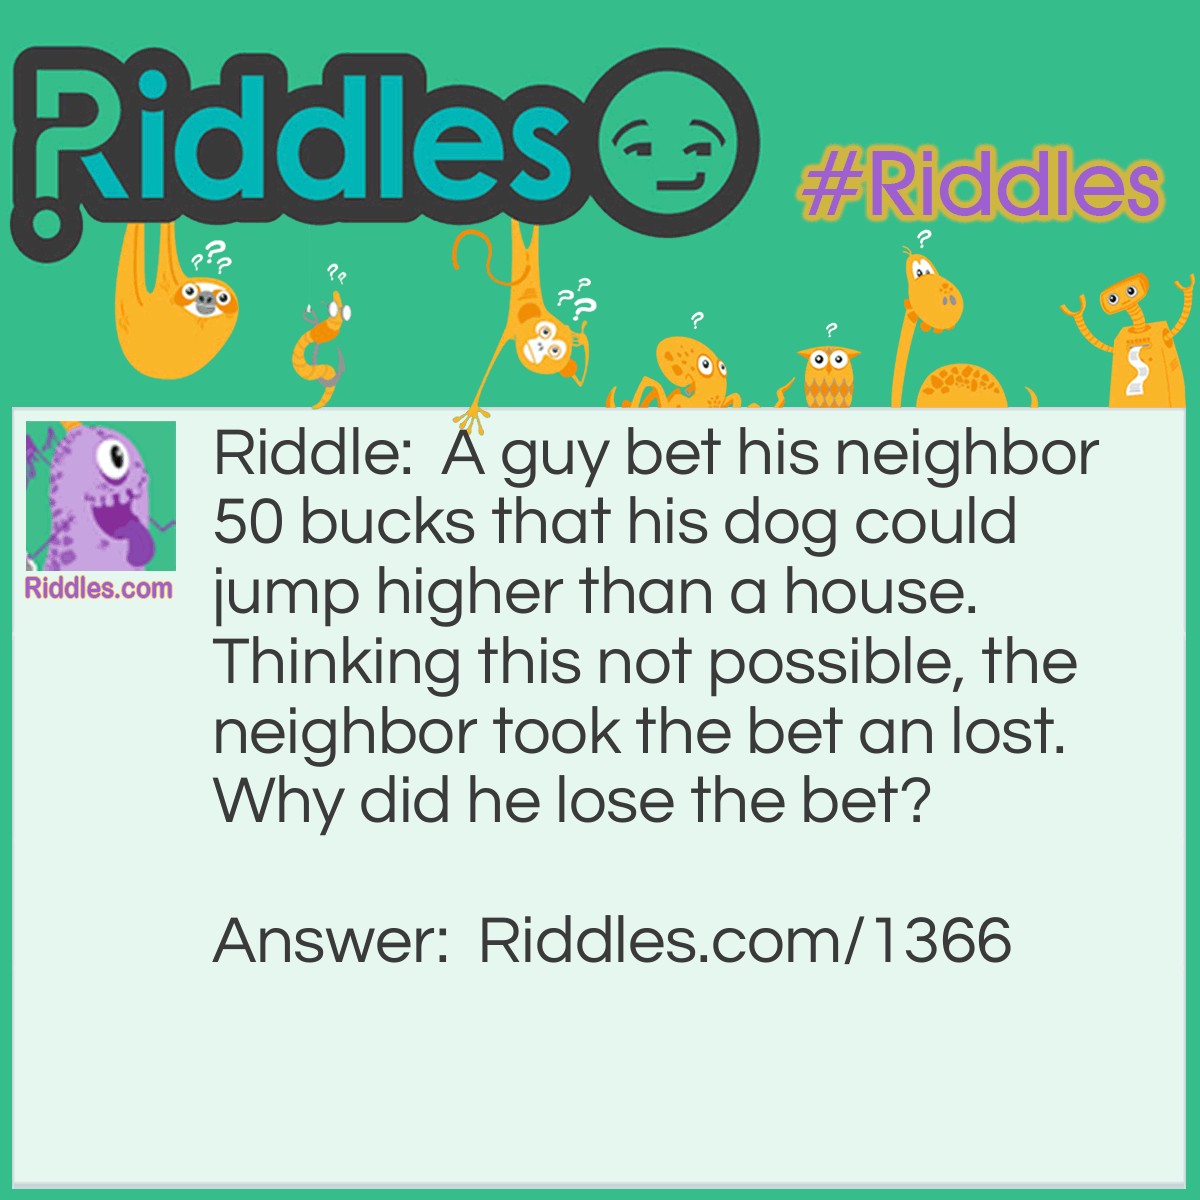 Riddle: A guy bet his neighbor 50 bucks that his dog could jump higher than a house. Thinking this was not possible, the neighbor took the bet and lost. 
Why did he lose the bet? Answer: a house cannot jump!